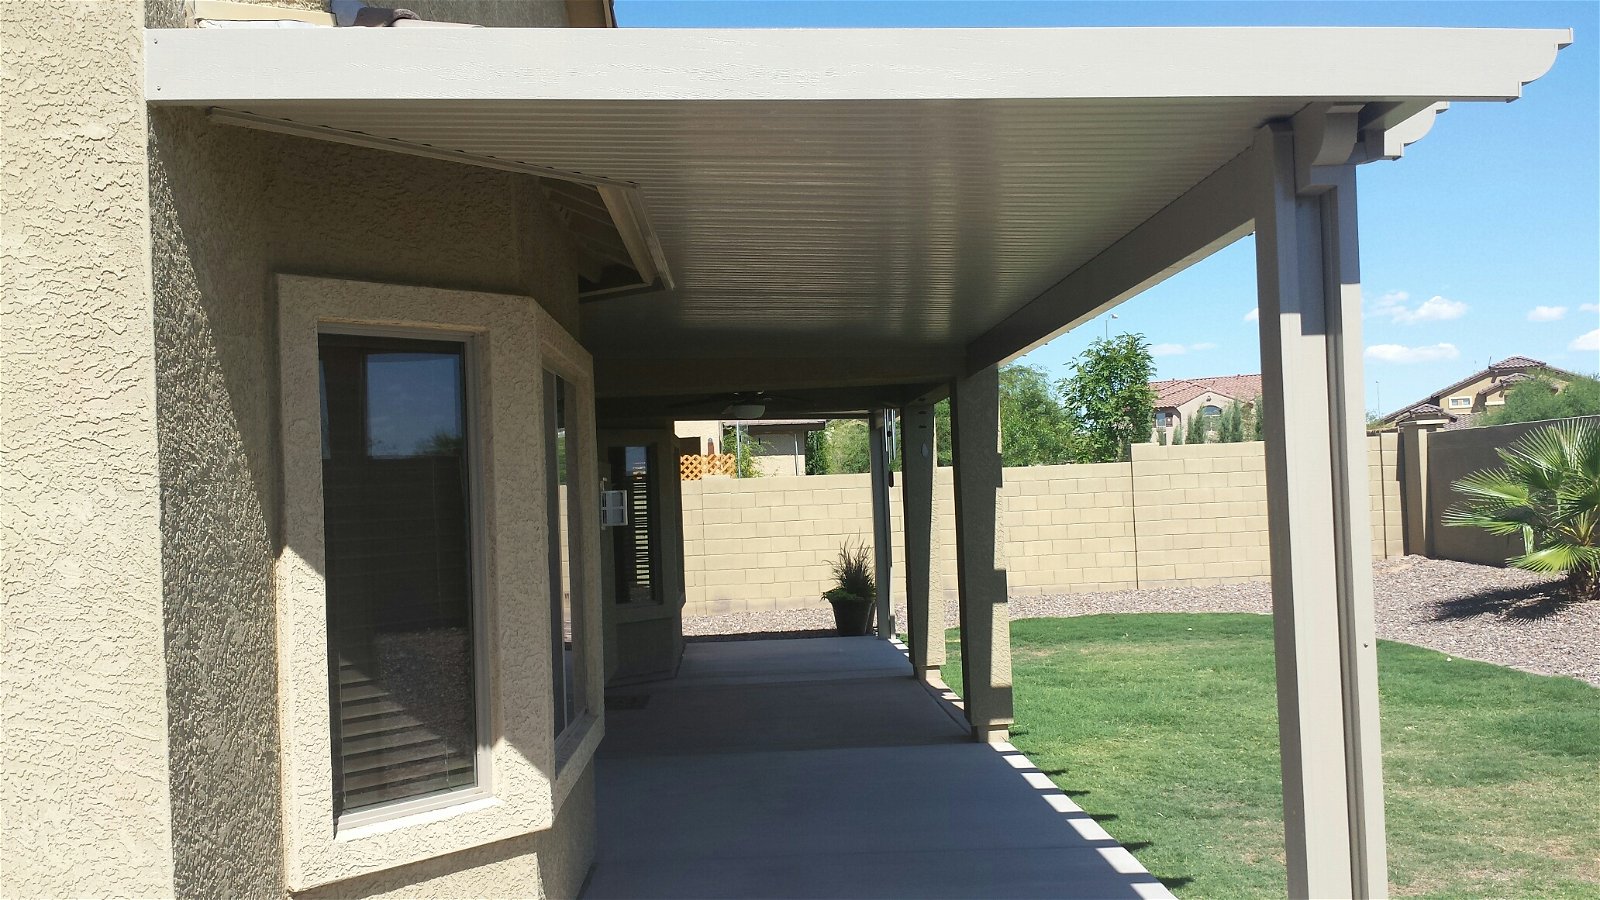 Project Pictures: Alumawood Solid Patio Cover in Mesa, AZ